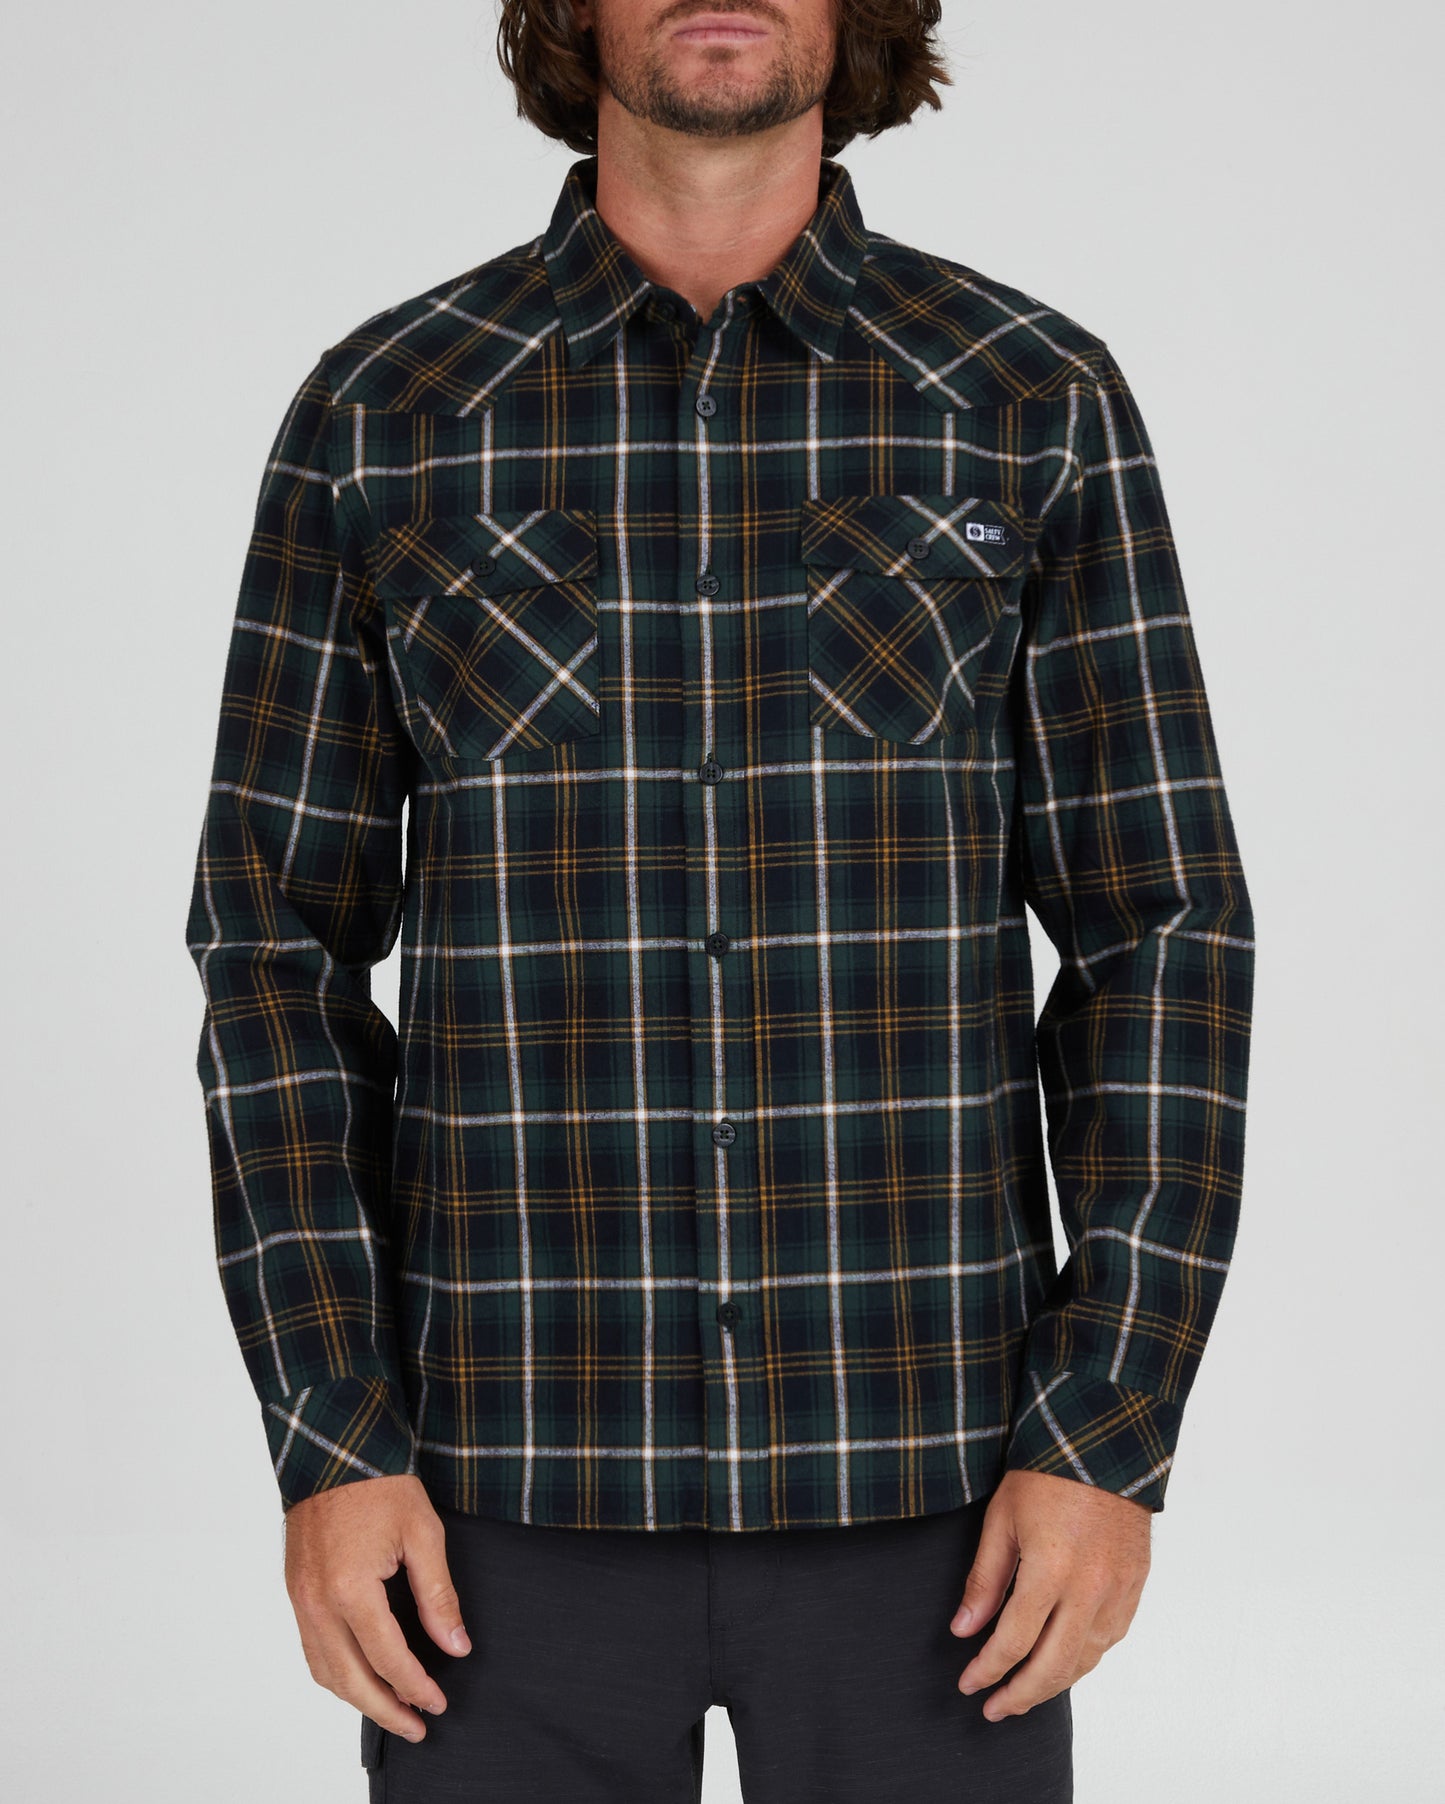 On body front of the Herdsman Black/Spruce Flannel